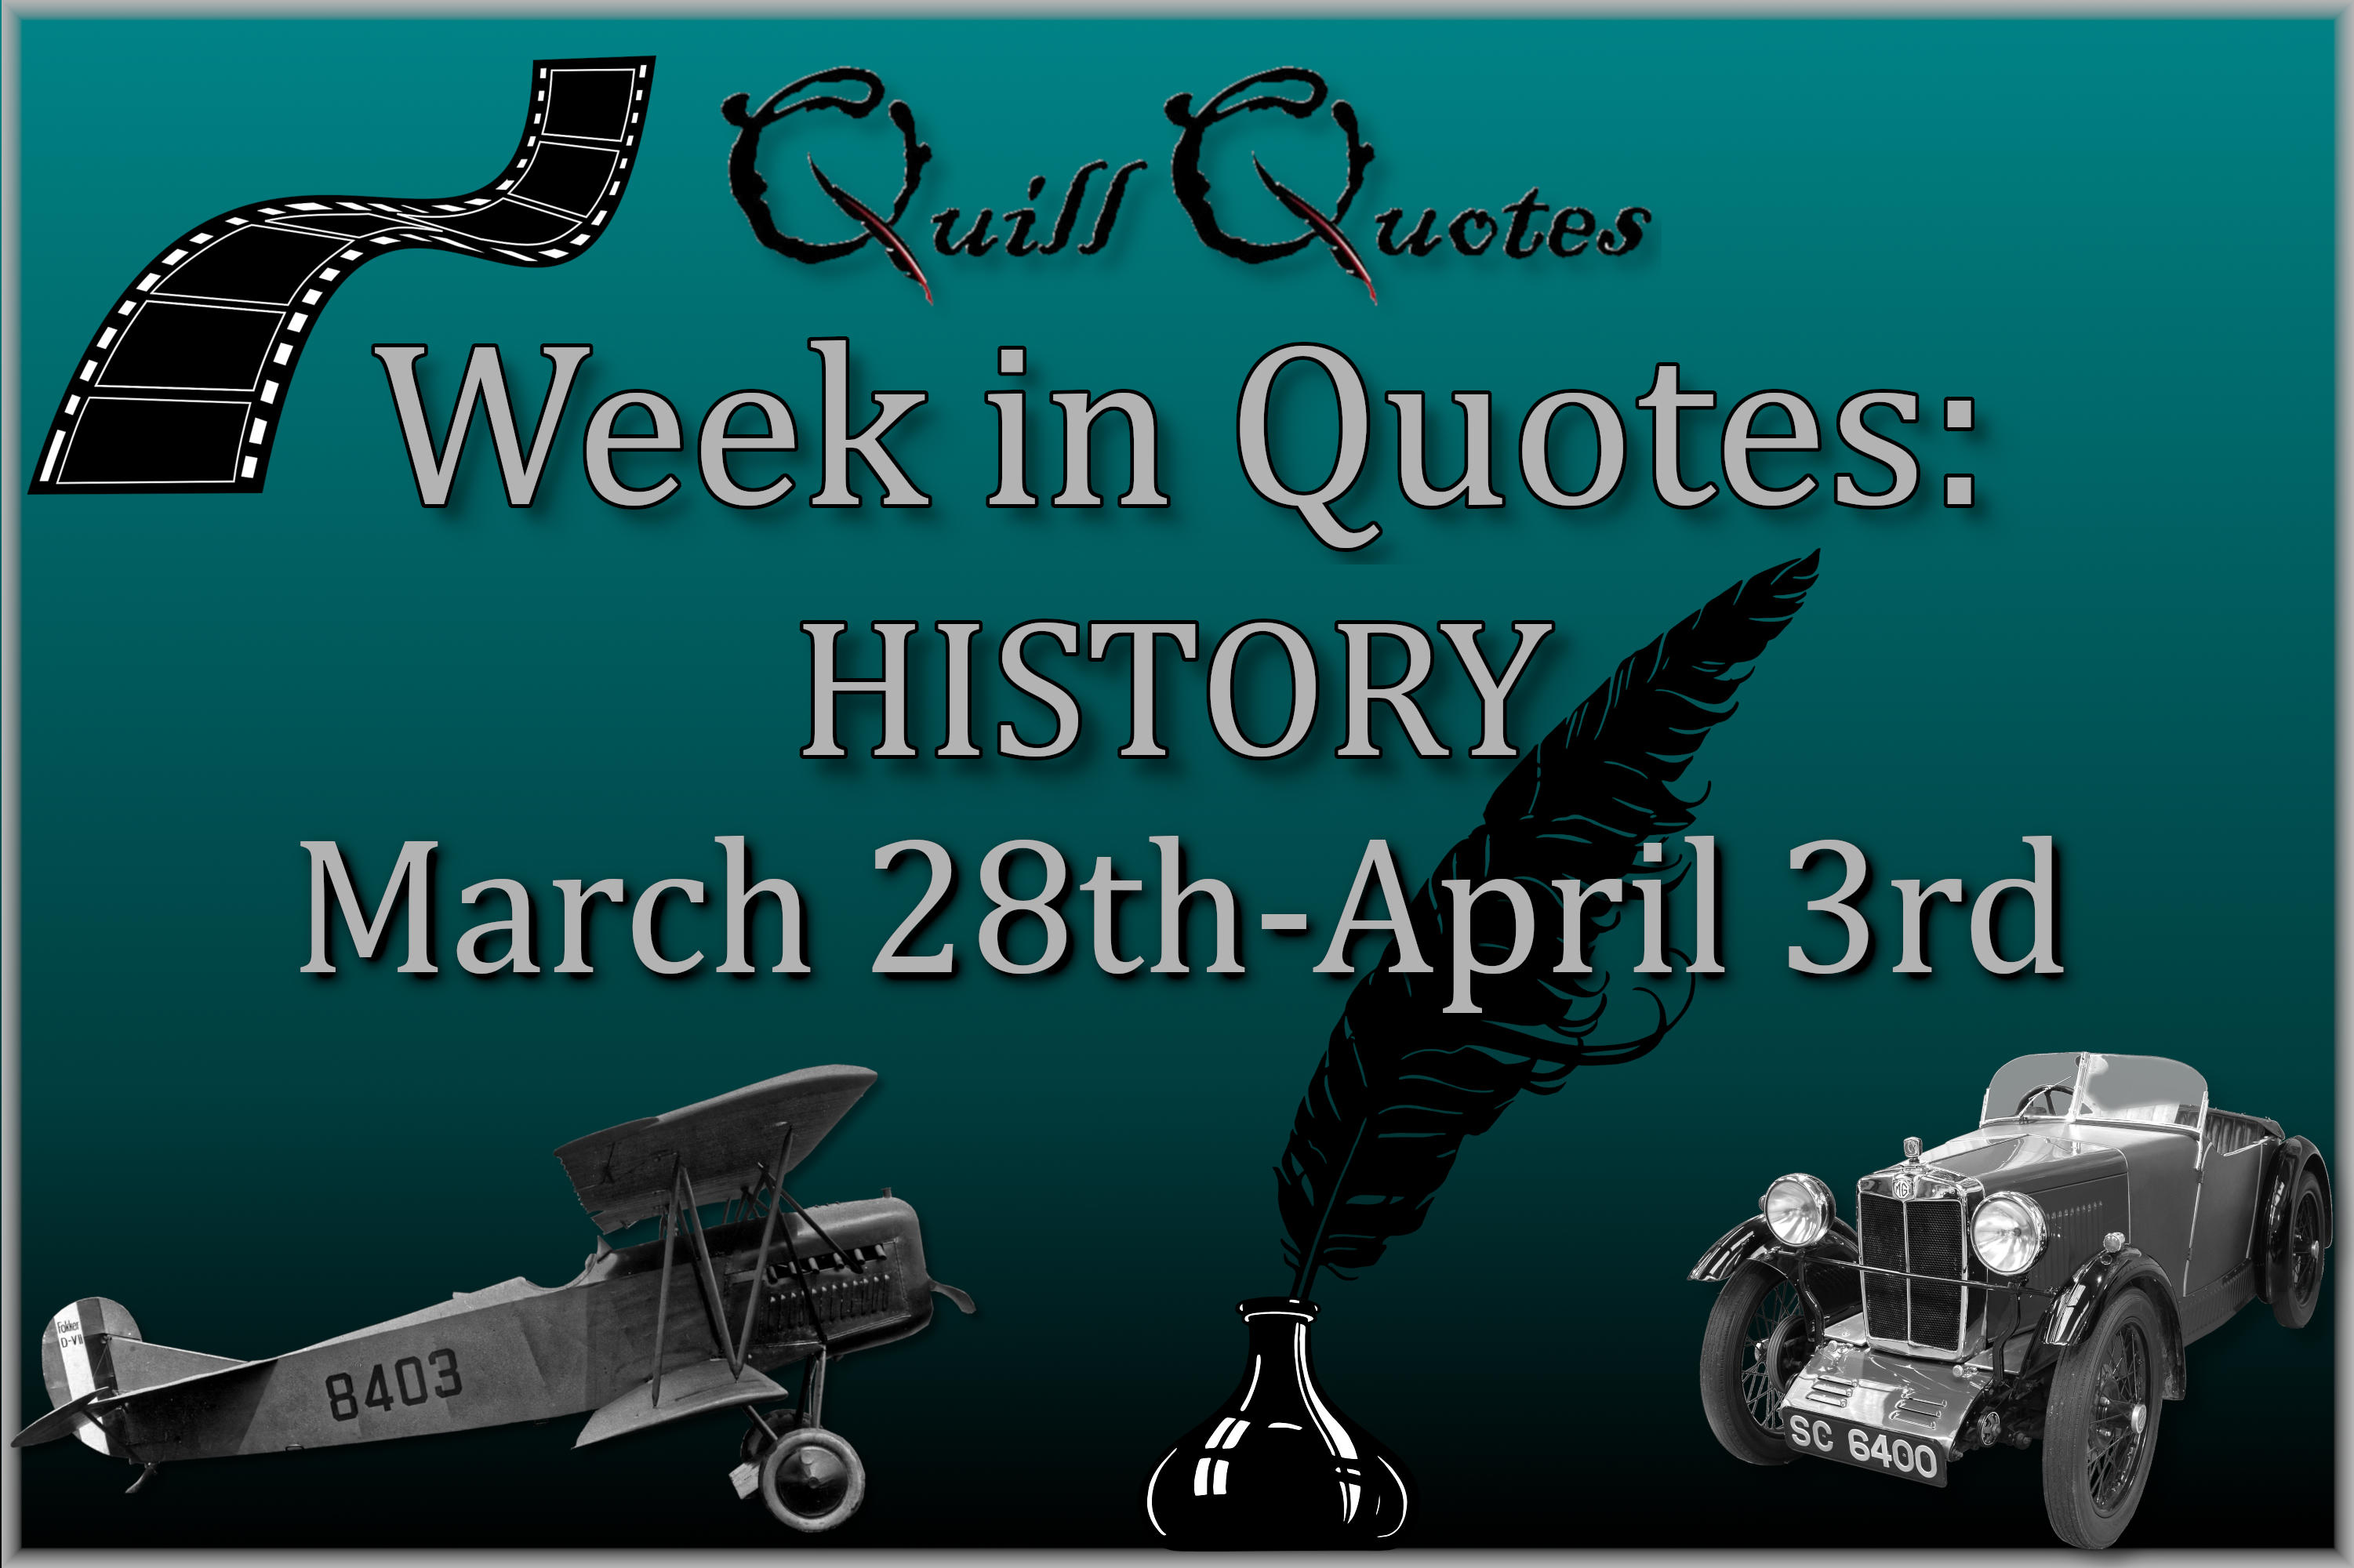 Week in Quotes HISTORY March 28th-April 3rd